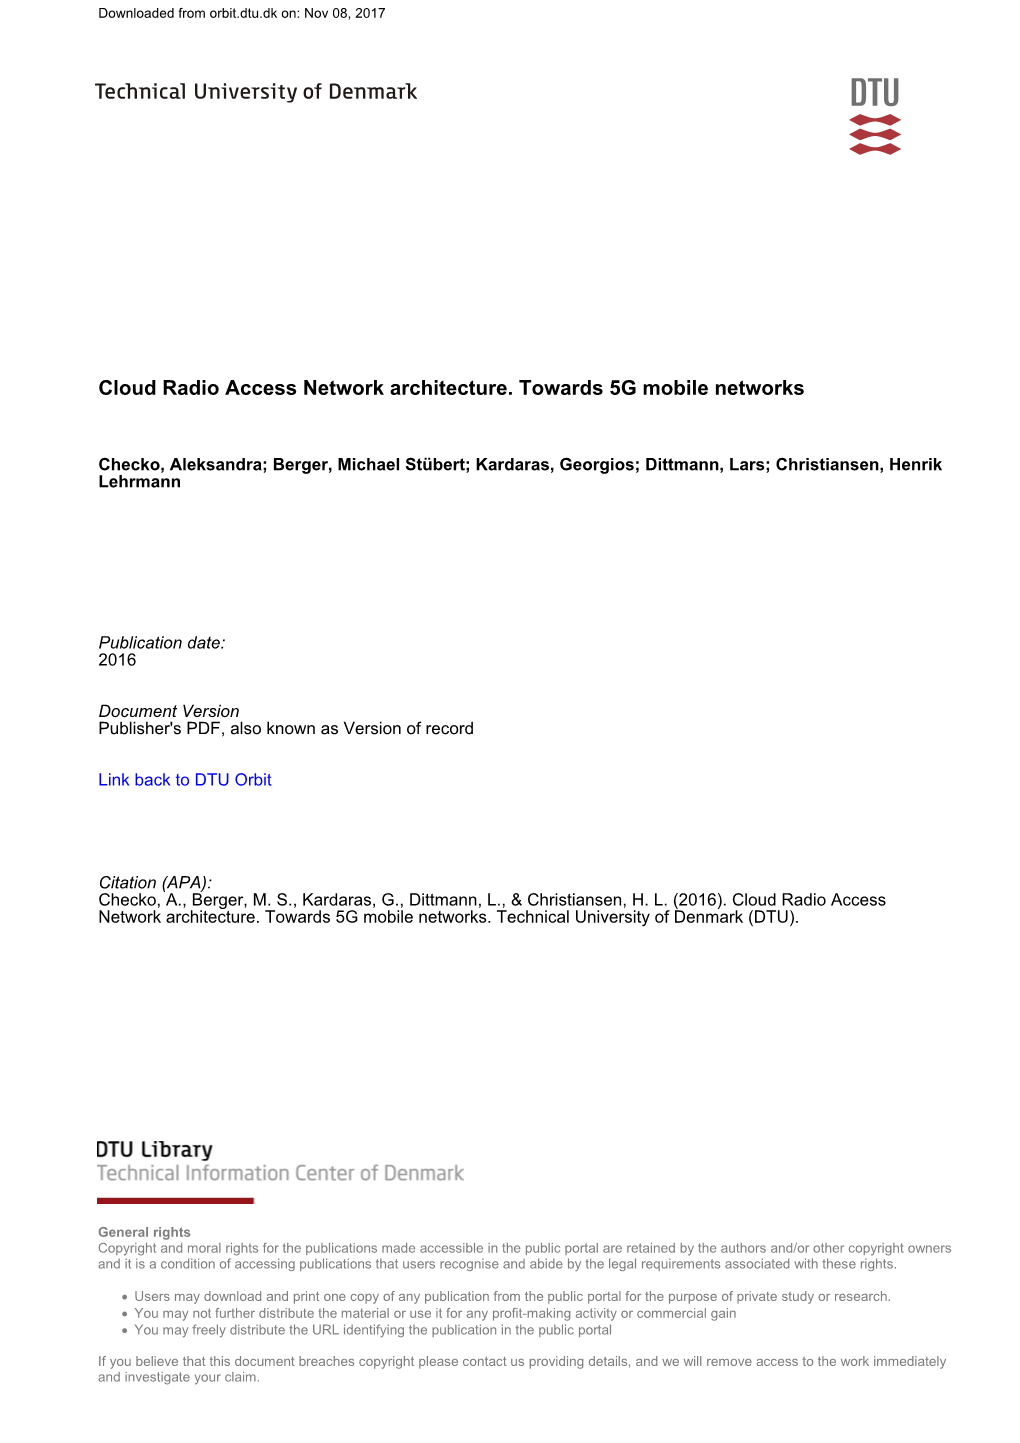 Cloud Radio Access Network Architecture. Towards 5G Mobile Networks